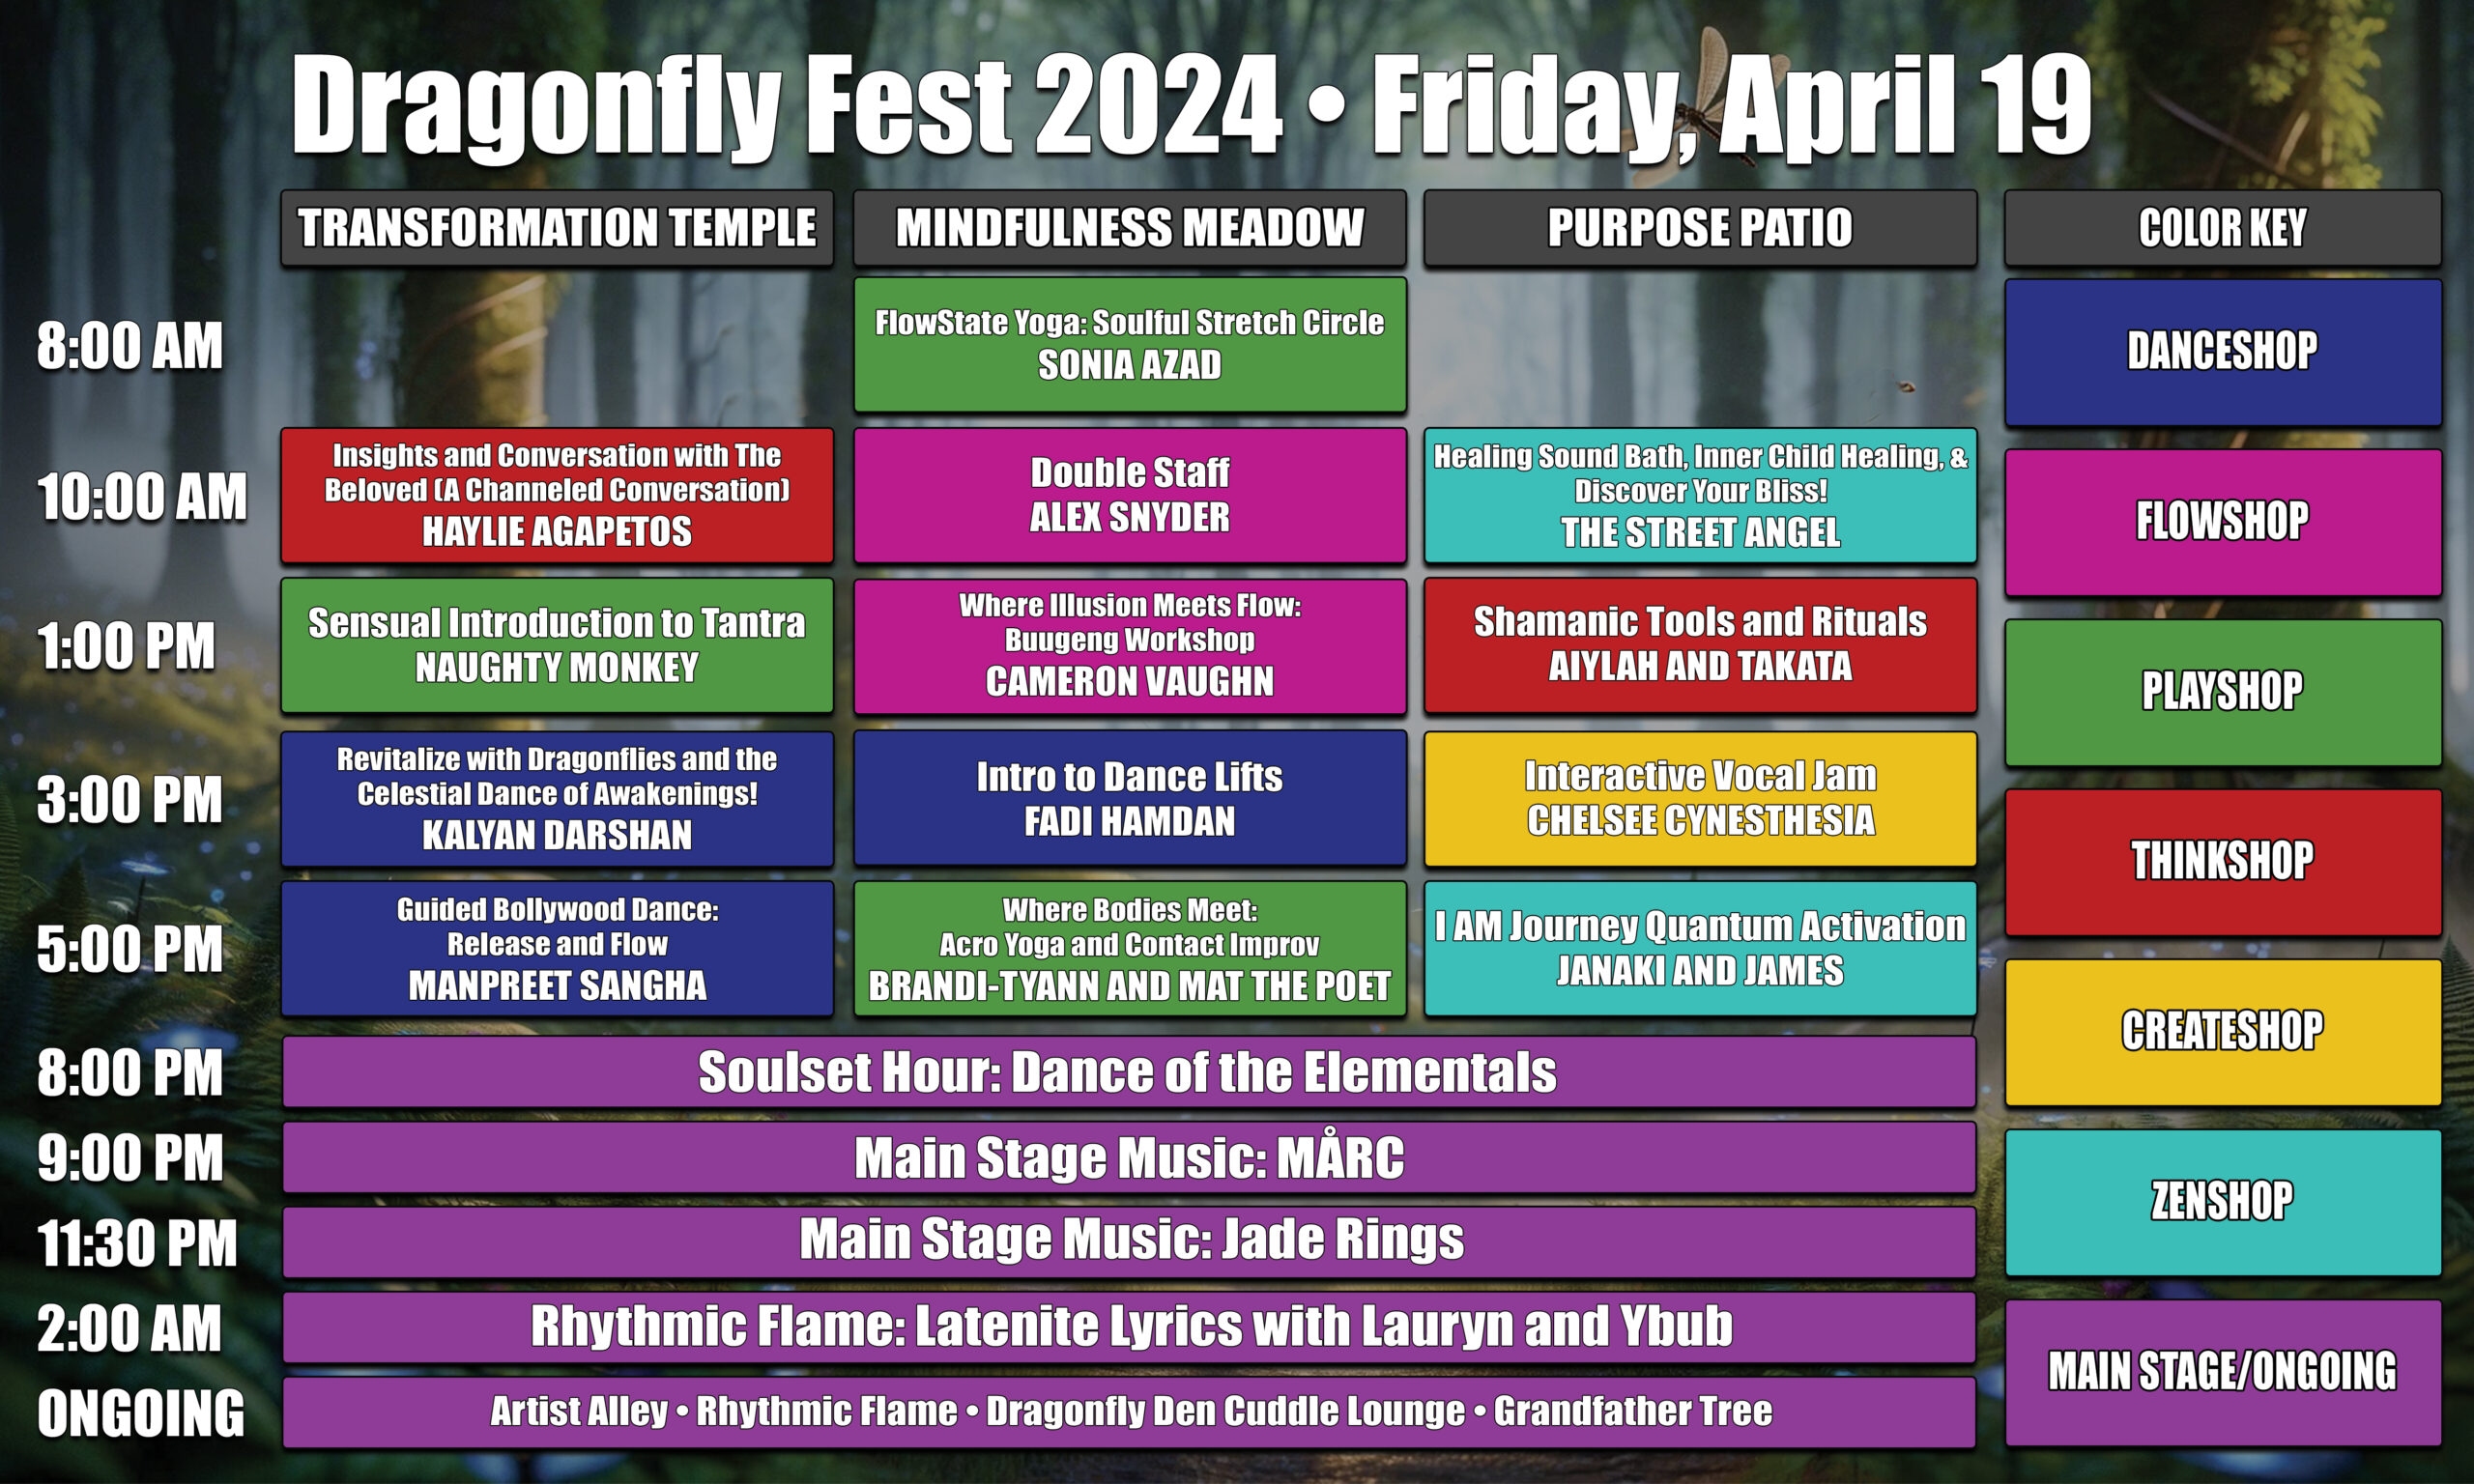 Dragonfly Fest 2024 Schedule - Friday